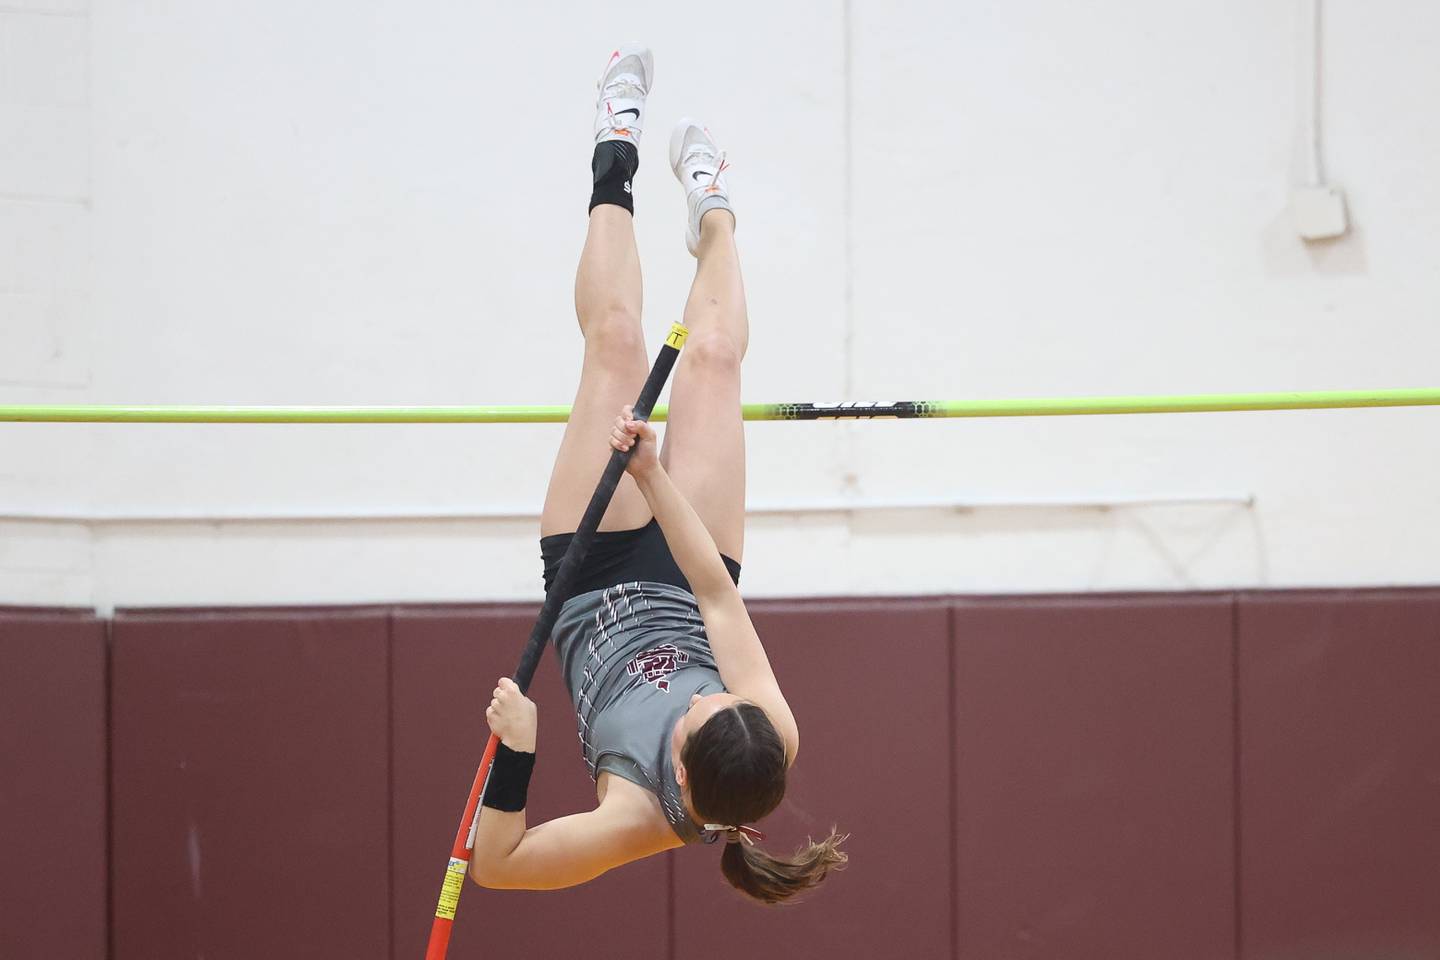 Lockport’s Makenna Skoczylas competes in the pole vault at the Class 3A Lockport Sectional on Friday, May 12, 2023, in Lockport.